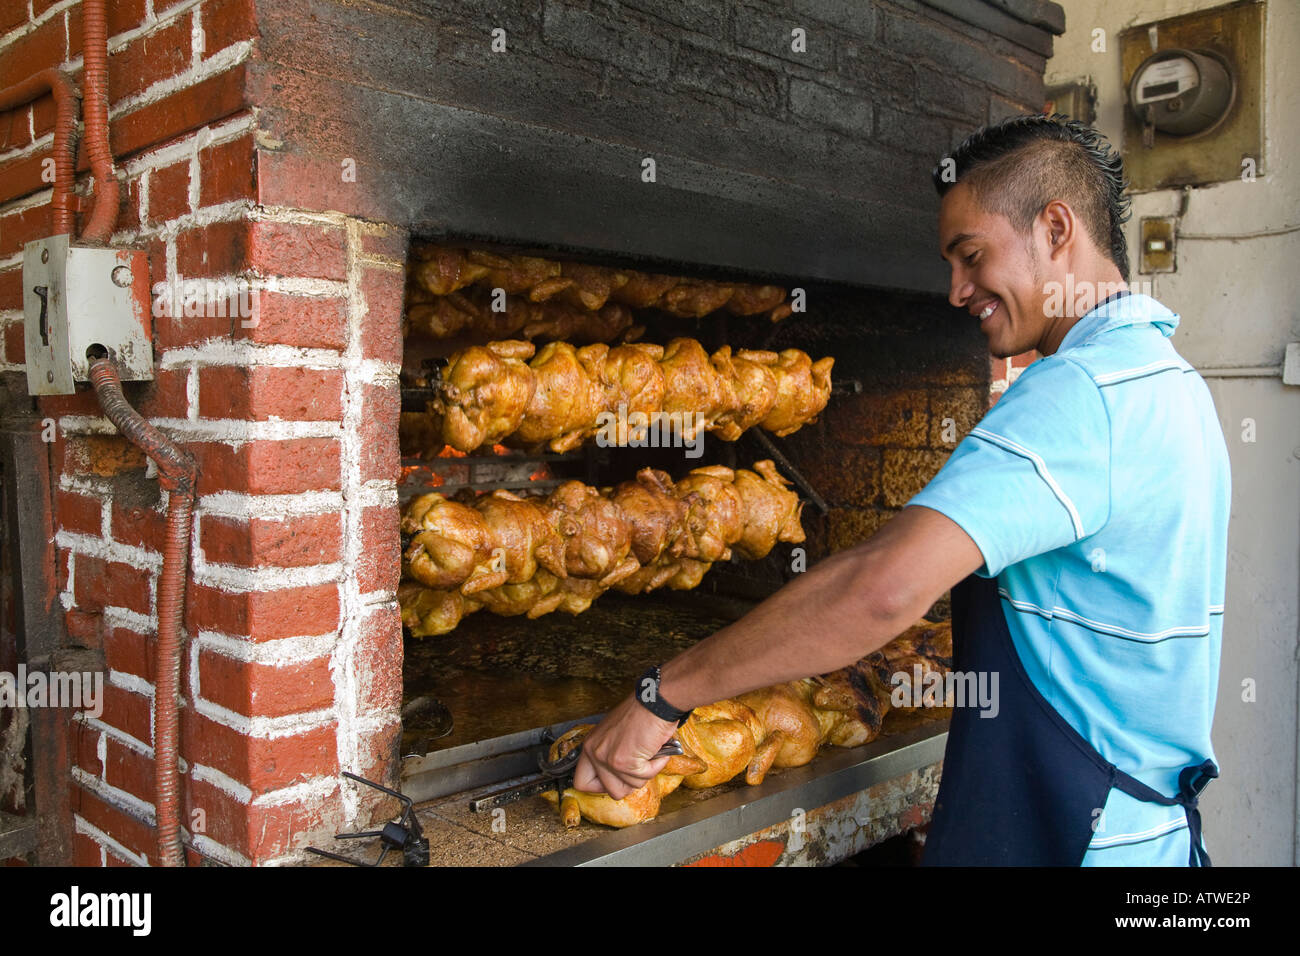 https://c8.alamy.com/comp/ATWE2P/mexico-guanajuato-young-male-putting-whole-chickens-on-rotisserie-ATWE2P.jpg